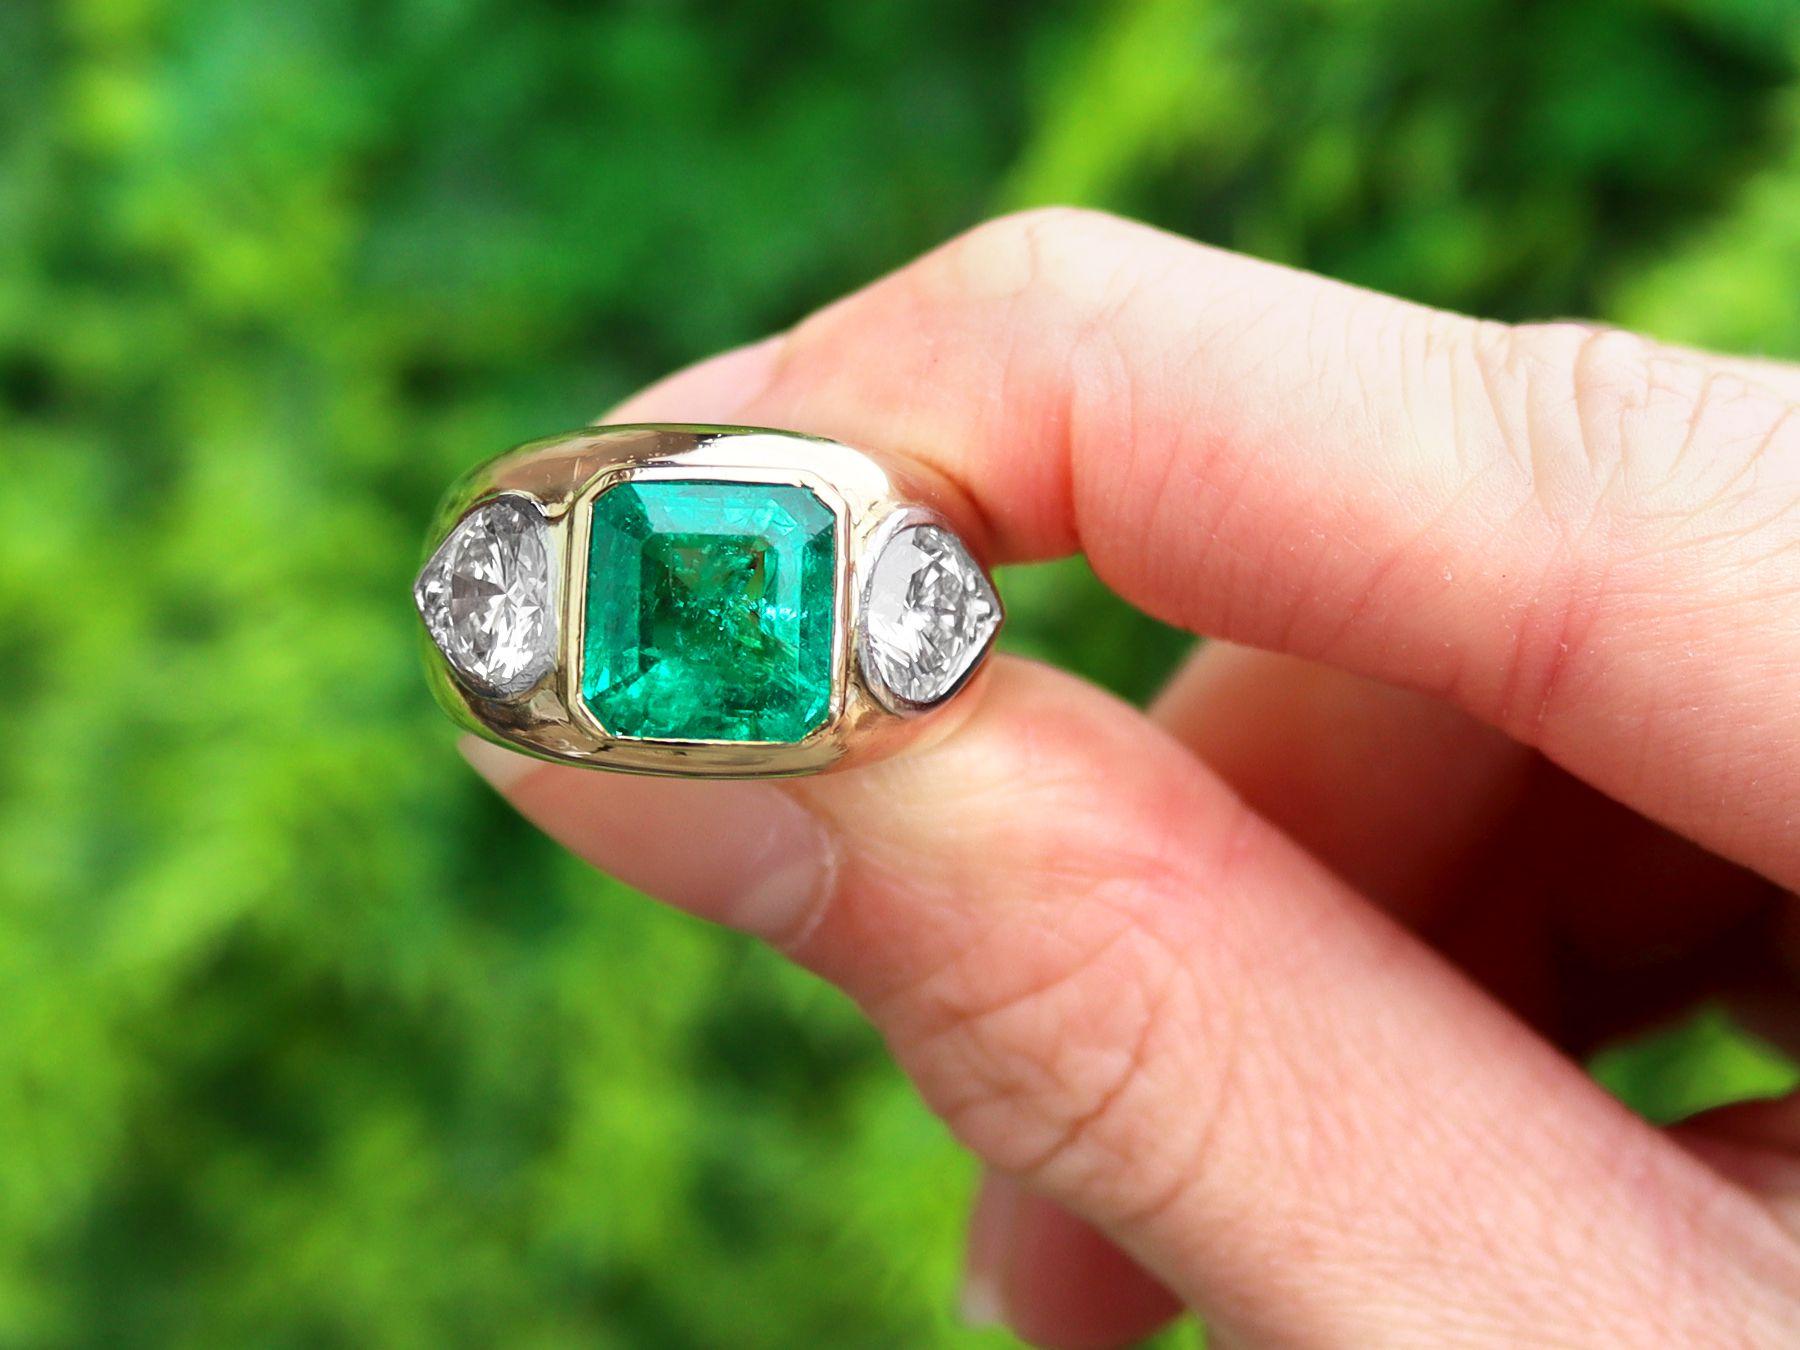 A stunning, fine and impressive vintage French 3.78 carat Colombian emerald and 2.18 carat diamond, 18 carat yellow gold and platinum set dress ring; part of our diverse diamond jewellery and estate jewelry collections.

This stunning, fine and